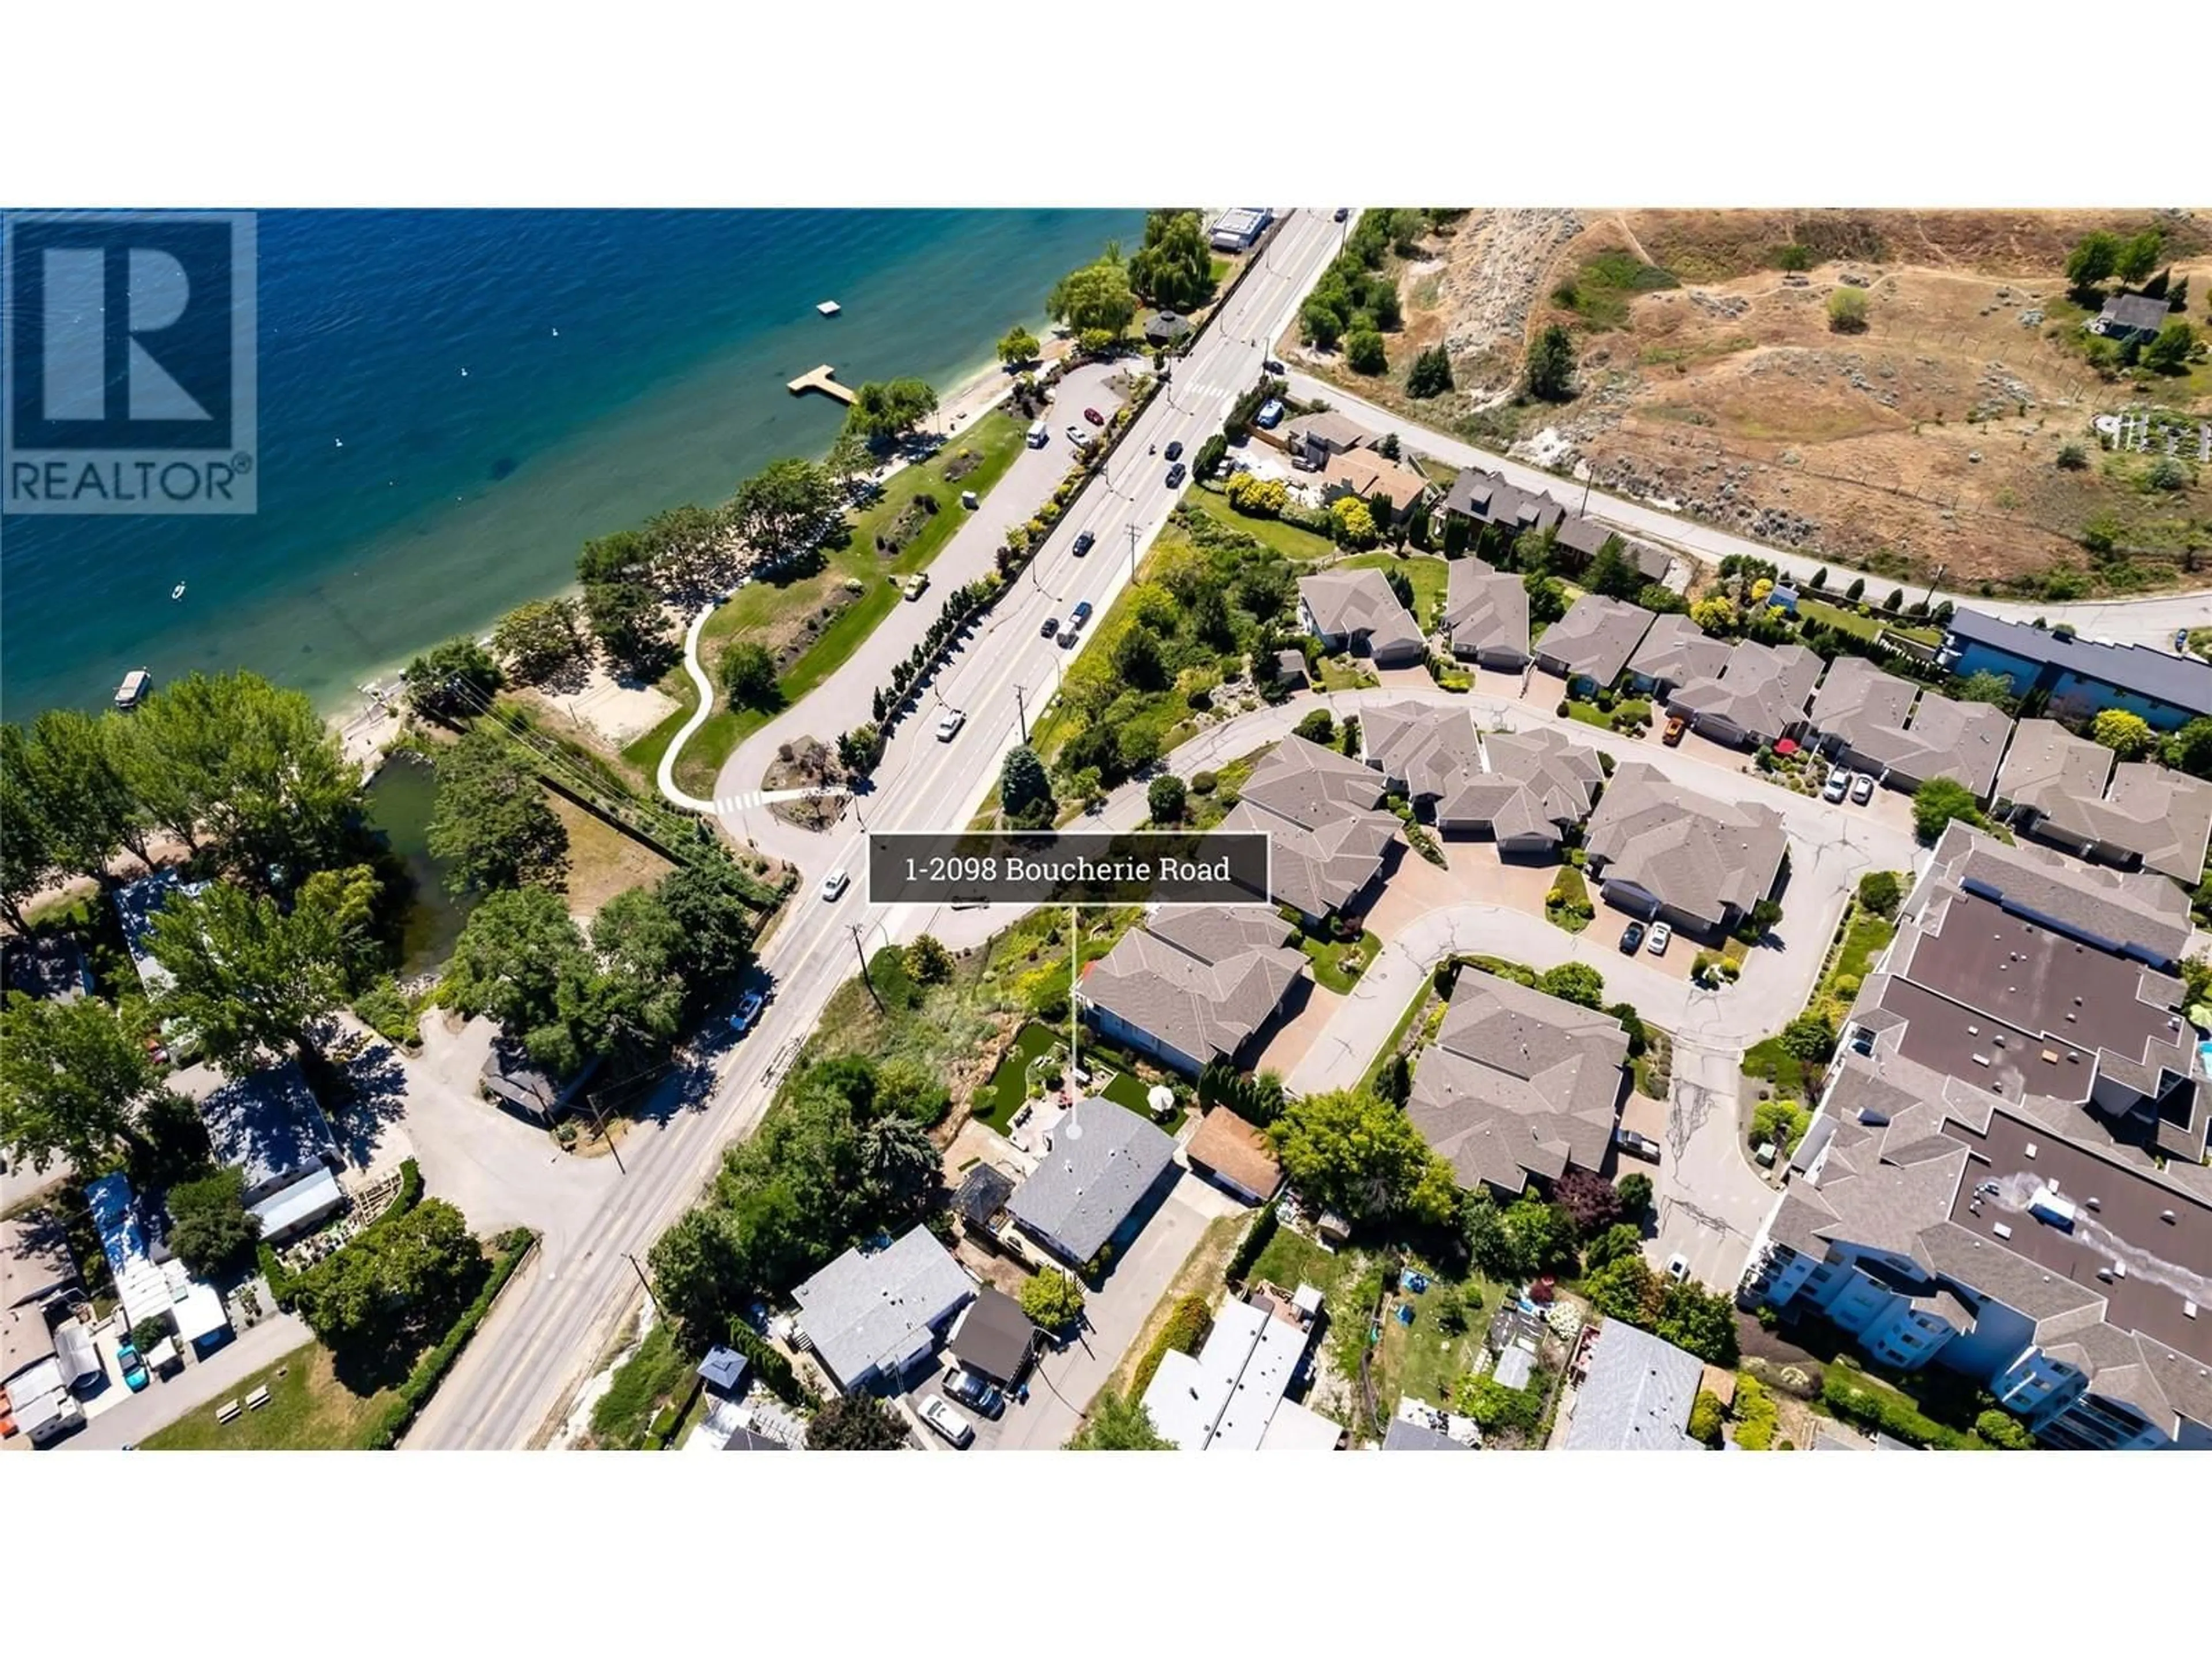 Lakeview for 2098 Boucherie Road Unit# 1 Lot# 1, West Kelowna British Columbia V4T2A4